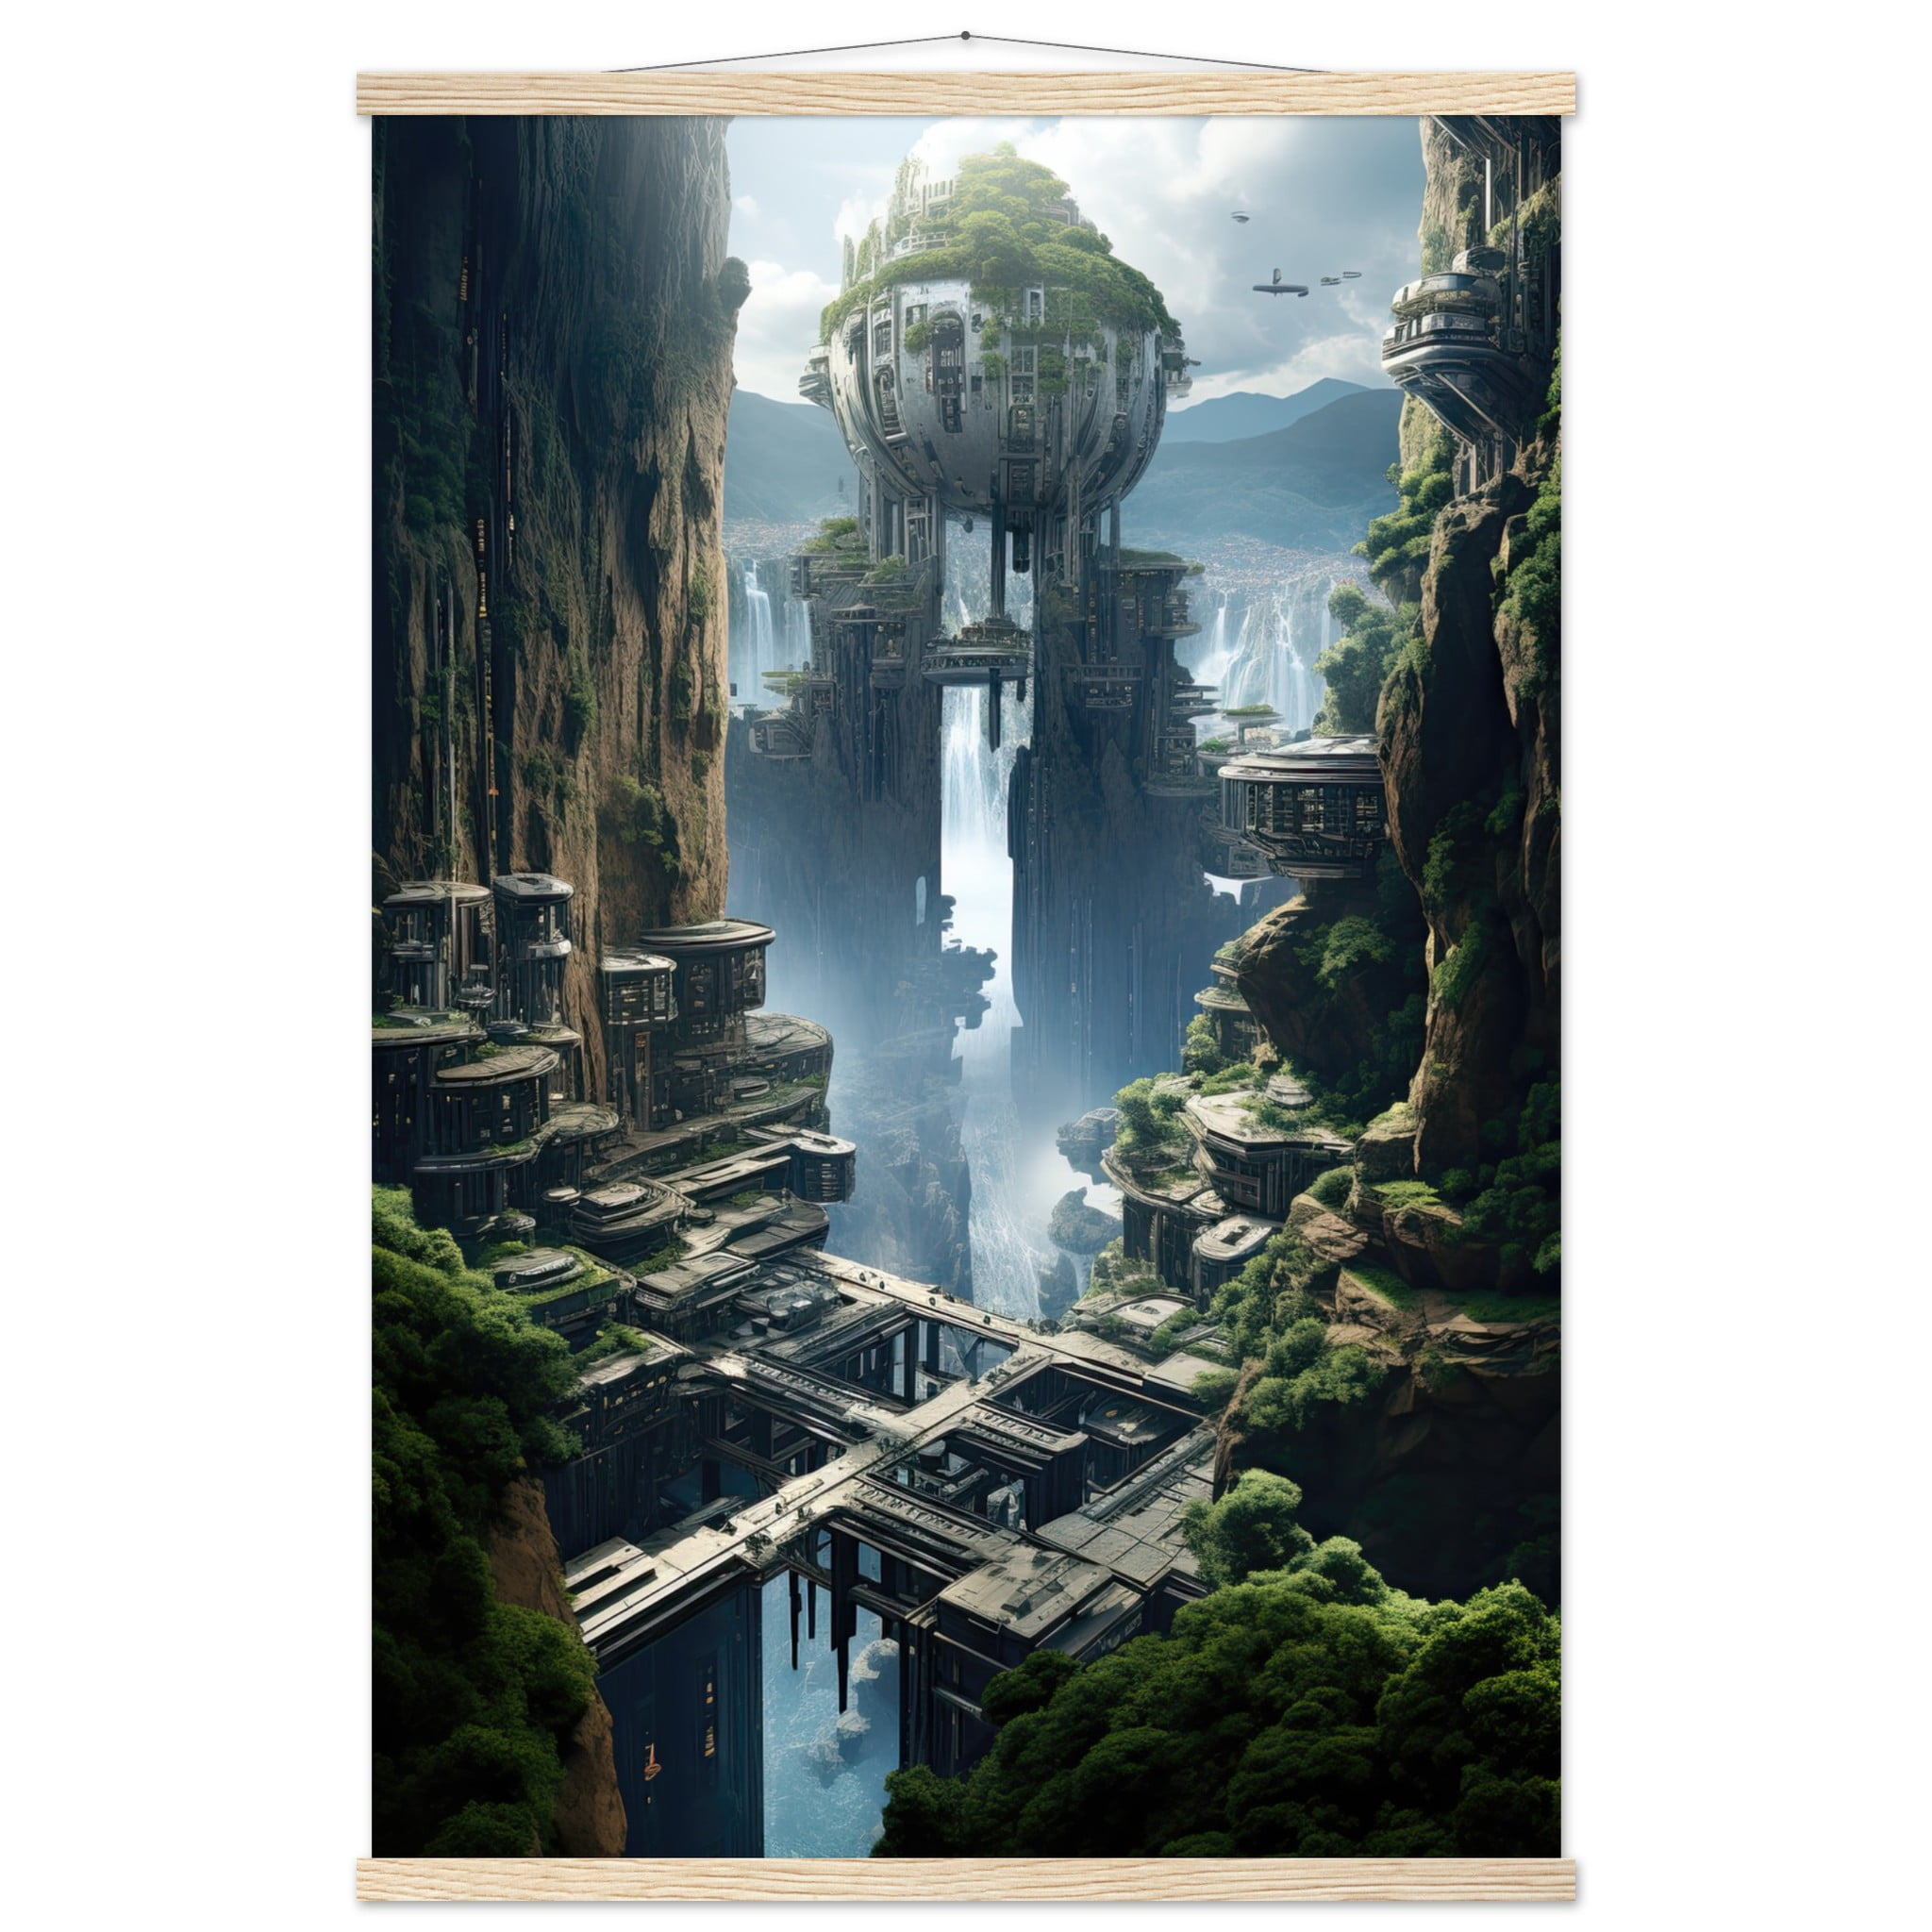 Sci-Fi Concept Art Print with Hanger – 60×90 cm / 24×36″, Natural wood wall hanger